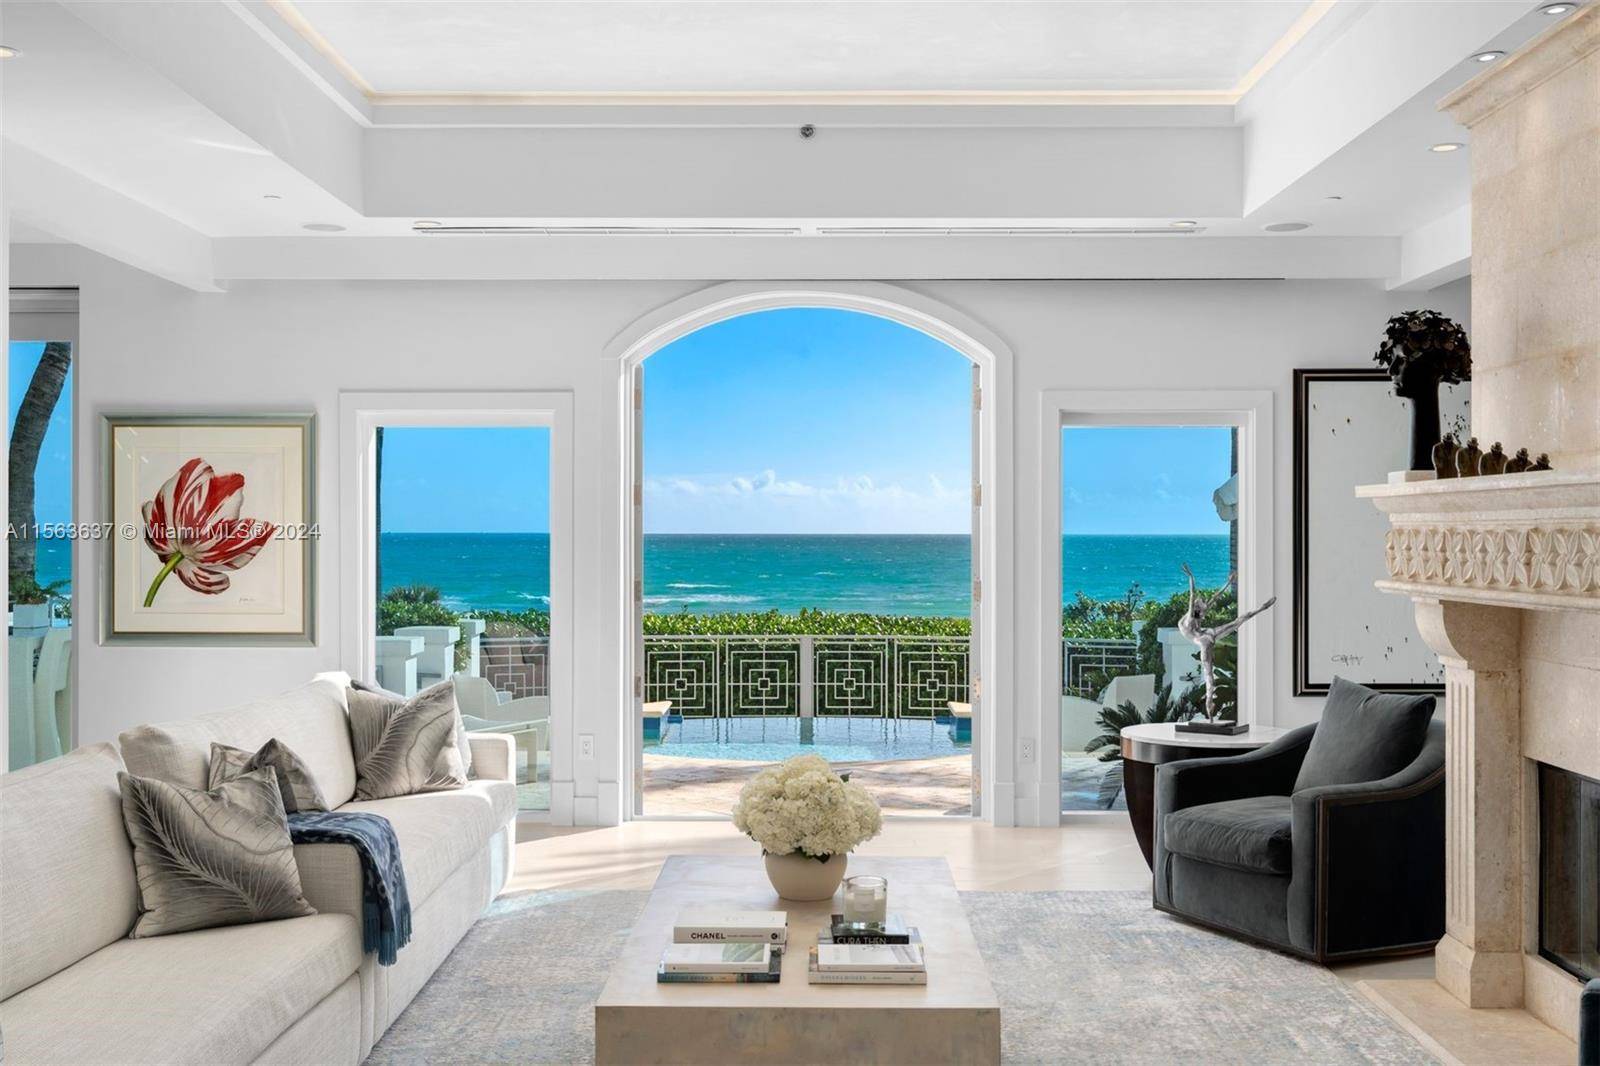 With only 6 Mediterranean style villas available, this is a unique opportunity to rent this fully furnished gem in Miami Beach, granting easy access to dining, shopping entertainment.